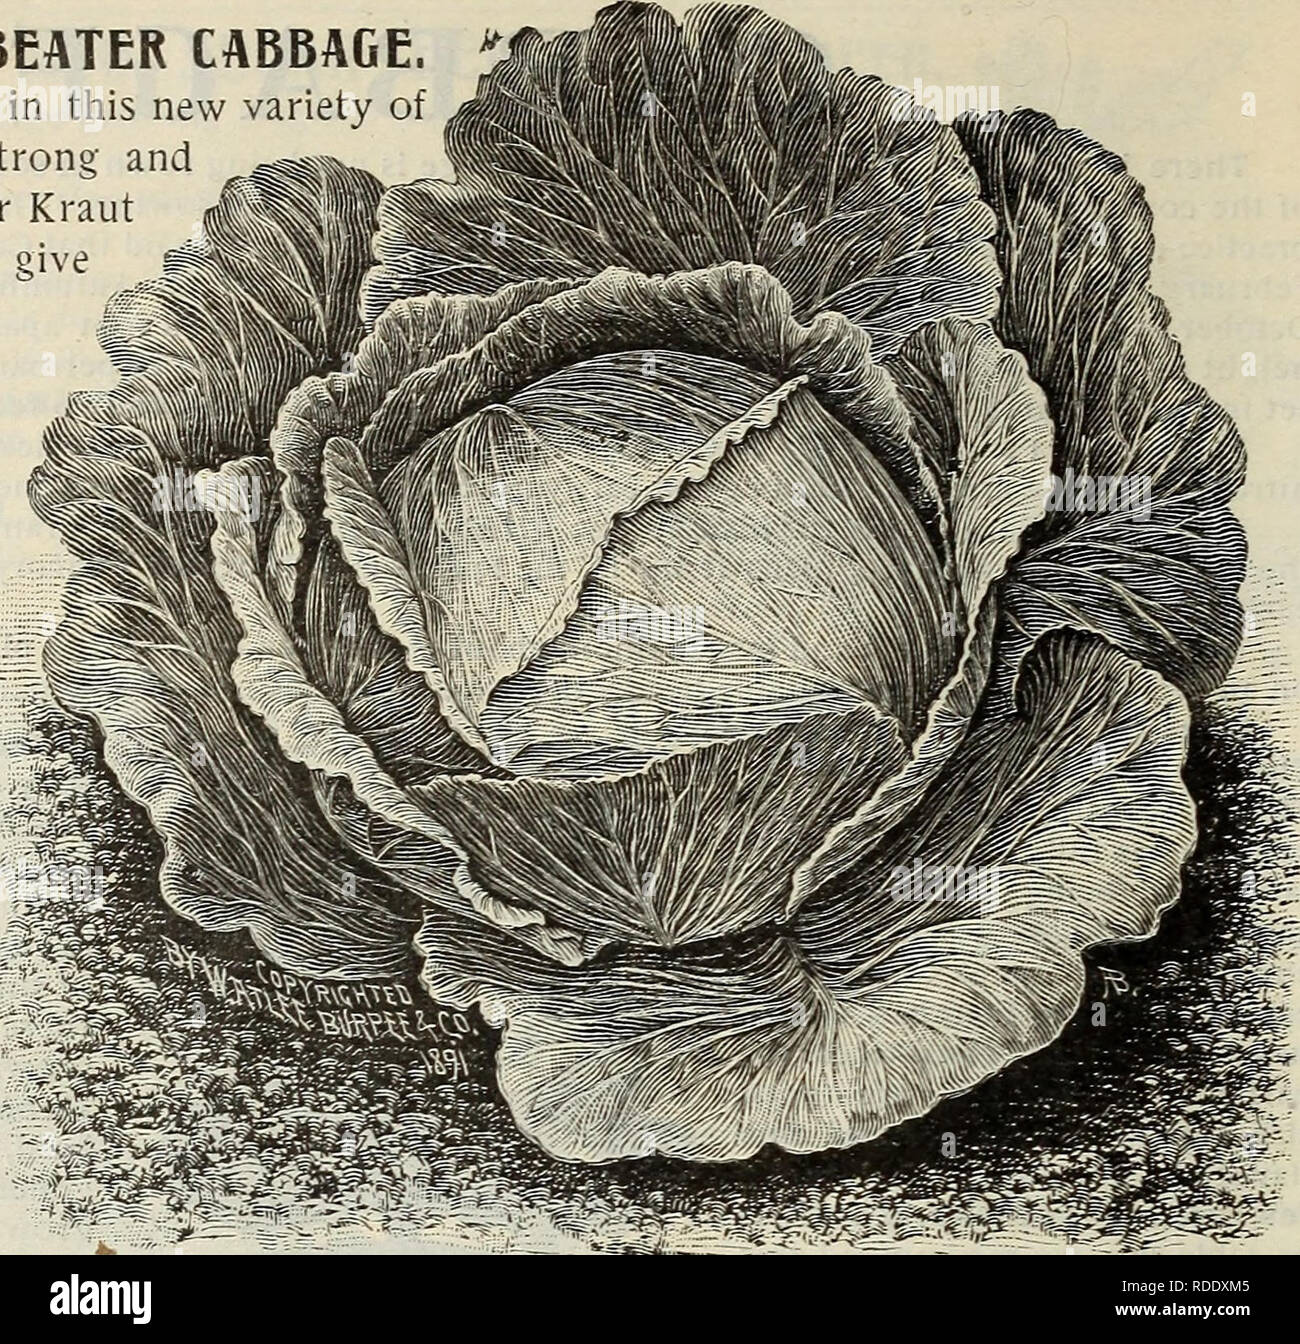 . E. H. Hunt : seedsman. Nurseries (Horticulture) Illinois Chicago Catalogs; Bulbs (Plants) Catalogs; Flowers Catalogs; Vegetables Seeds Catalogs; Plants, Ornamental Catalogs. 14 E. H. HUNT, SEEDSMAN, CHICAGO, ILLINOIS. BURPEE'S WORLD BEATER CABBAGE. The claims for excellence in this new variety of Cabbage are many and strong and those desiring great size for Kraut purposes will do well to give this variety a trial. The introducer says: &quot;The World Beater&quot; is fully as large as the Marblehead Mammoth, that it is uni- formly true to type and sure to head, &quot;solid as a rock.&quot; Th Stock Photo